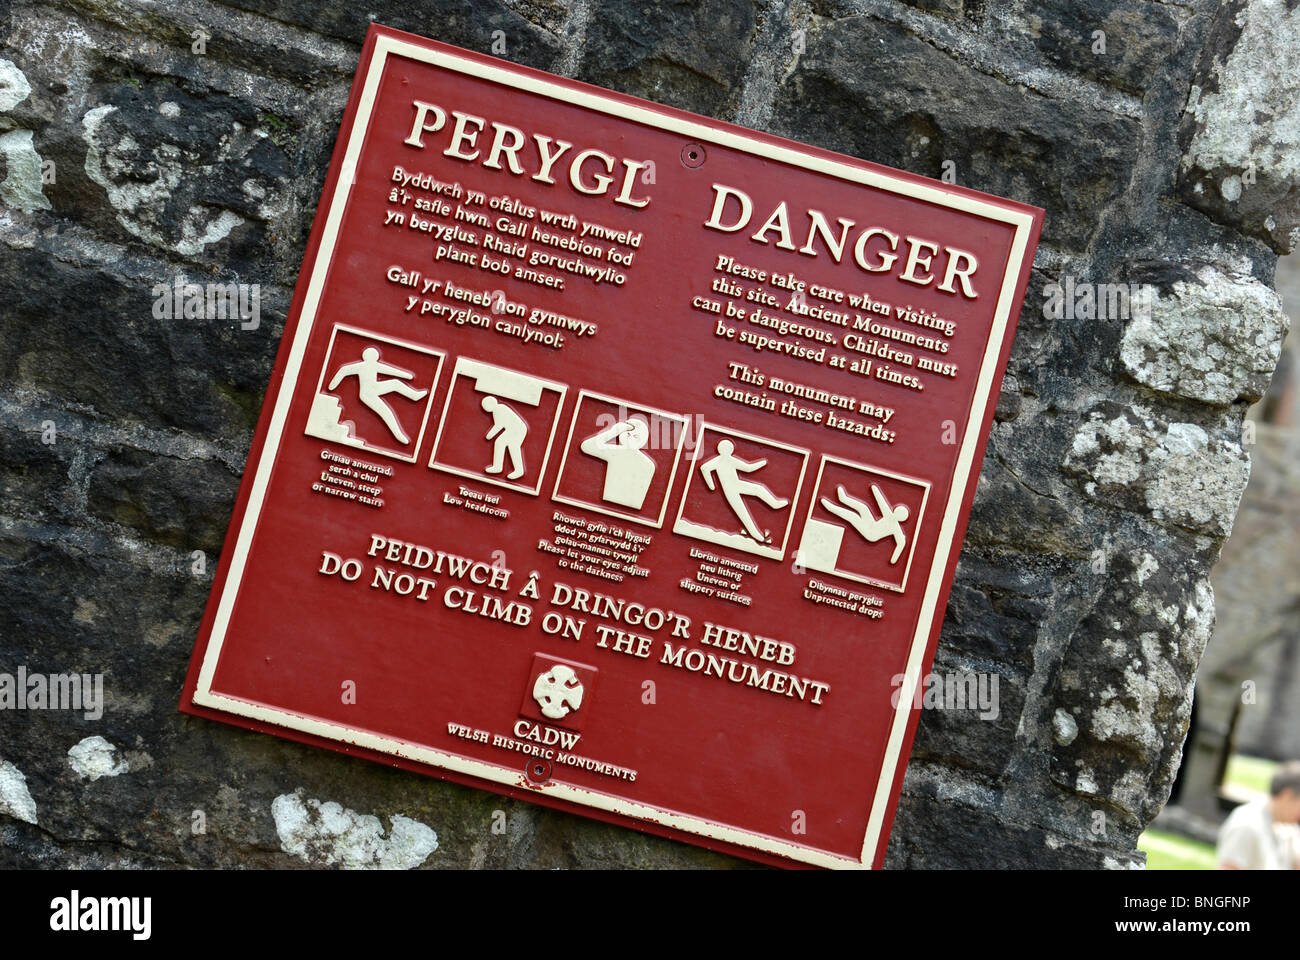 Public information sign warning of dangers at a historic monument in Wales Stock Photo